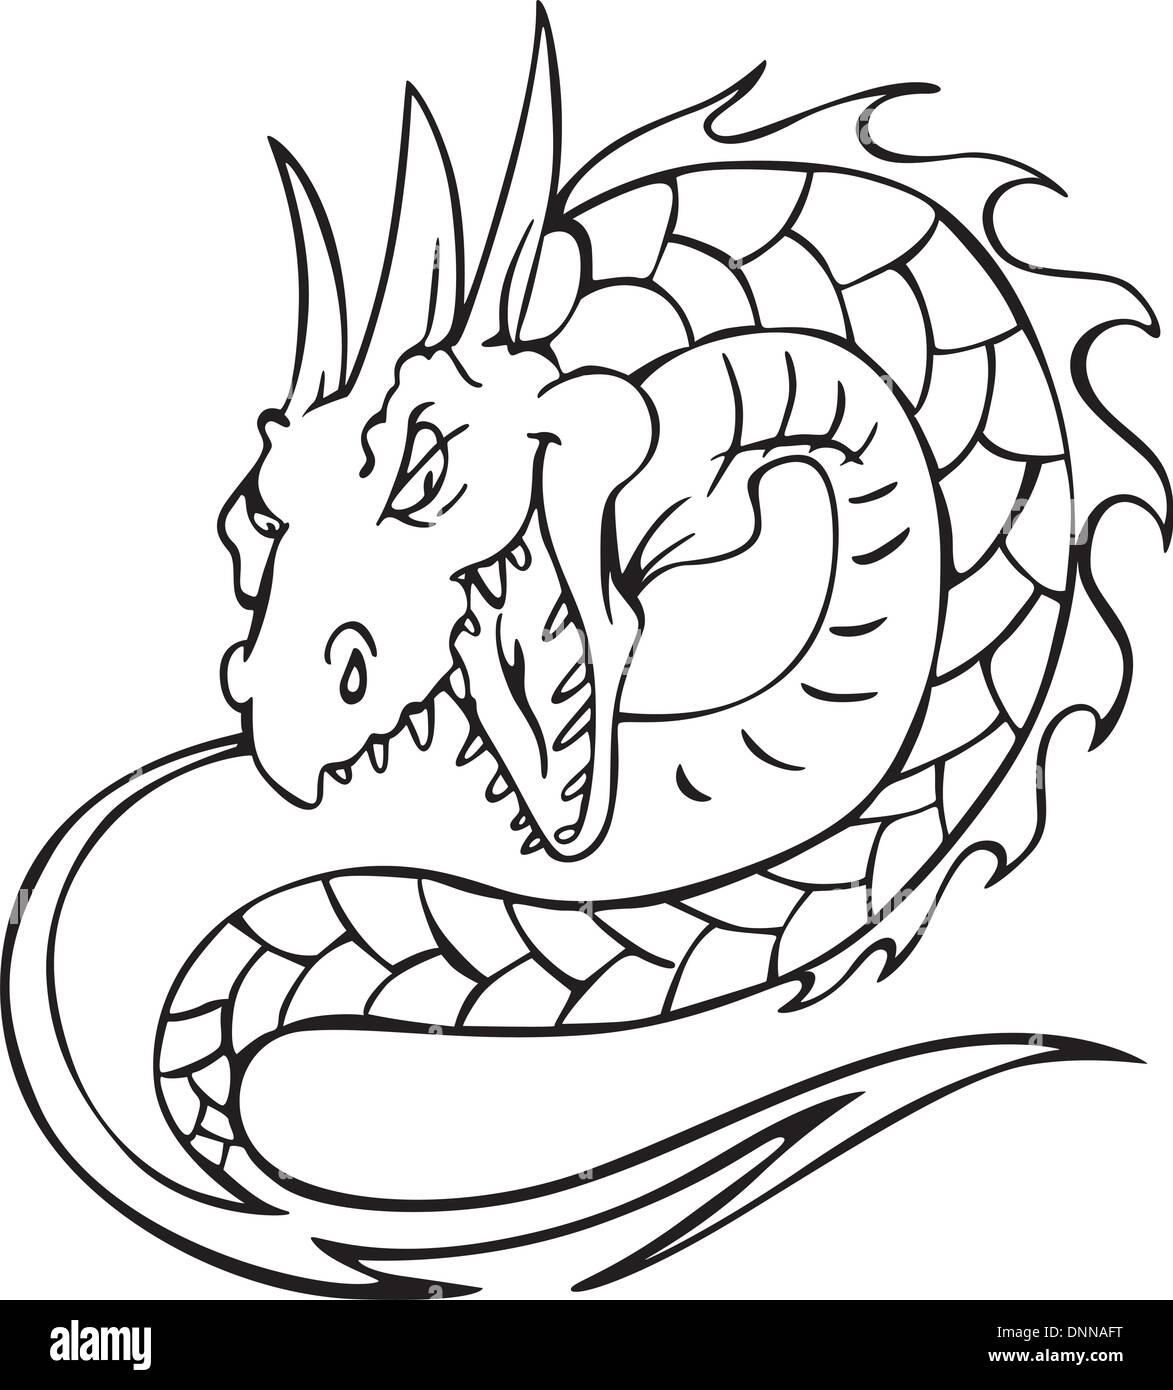 Dragon serpent. Black and white vector illustration. Stock Vector